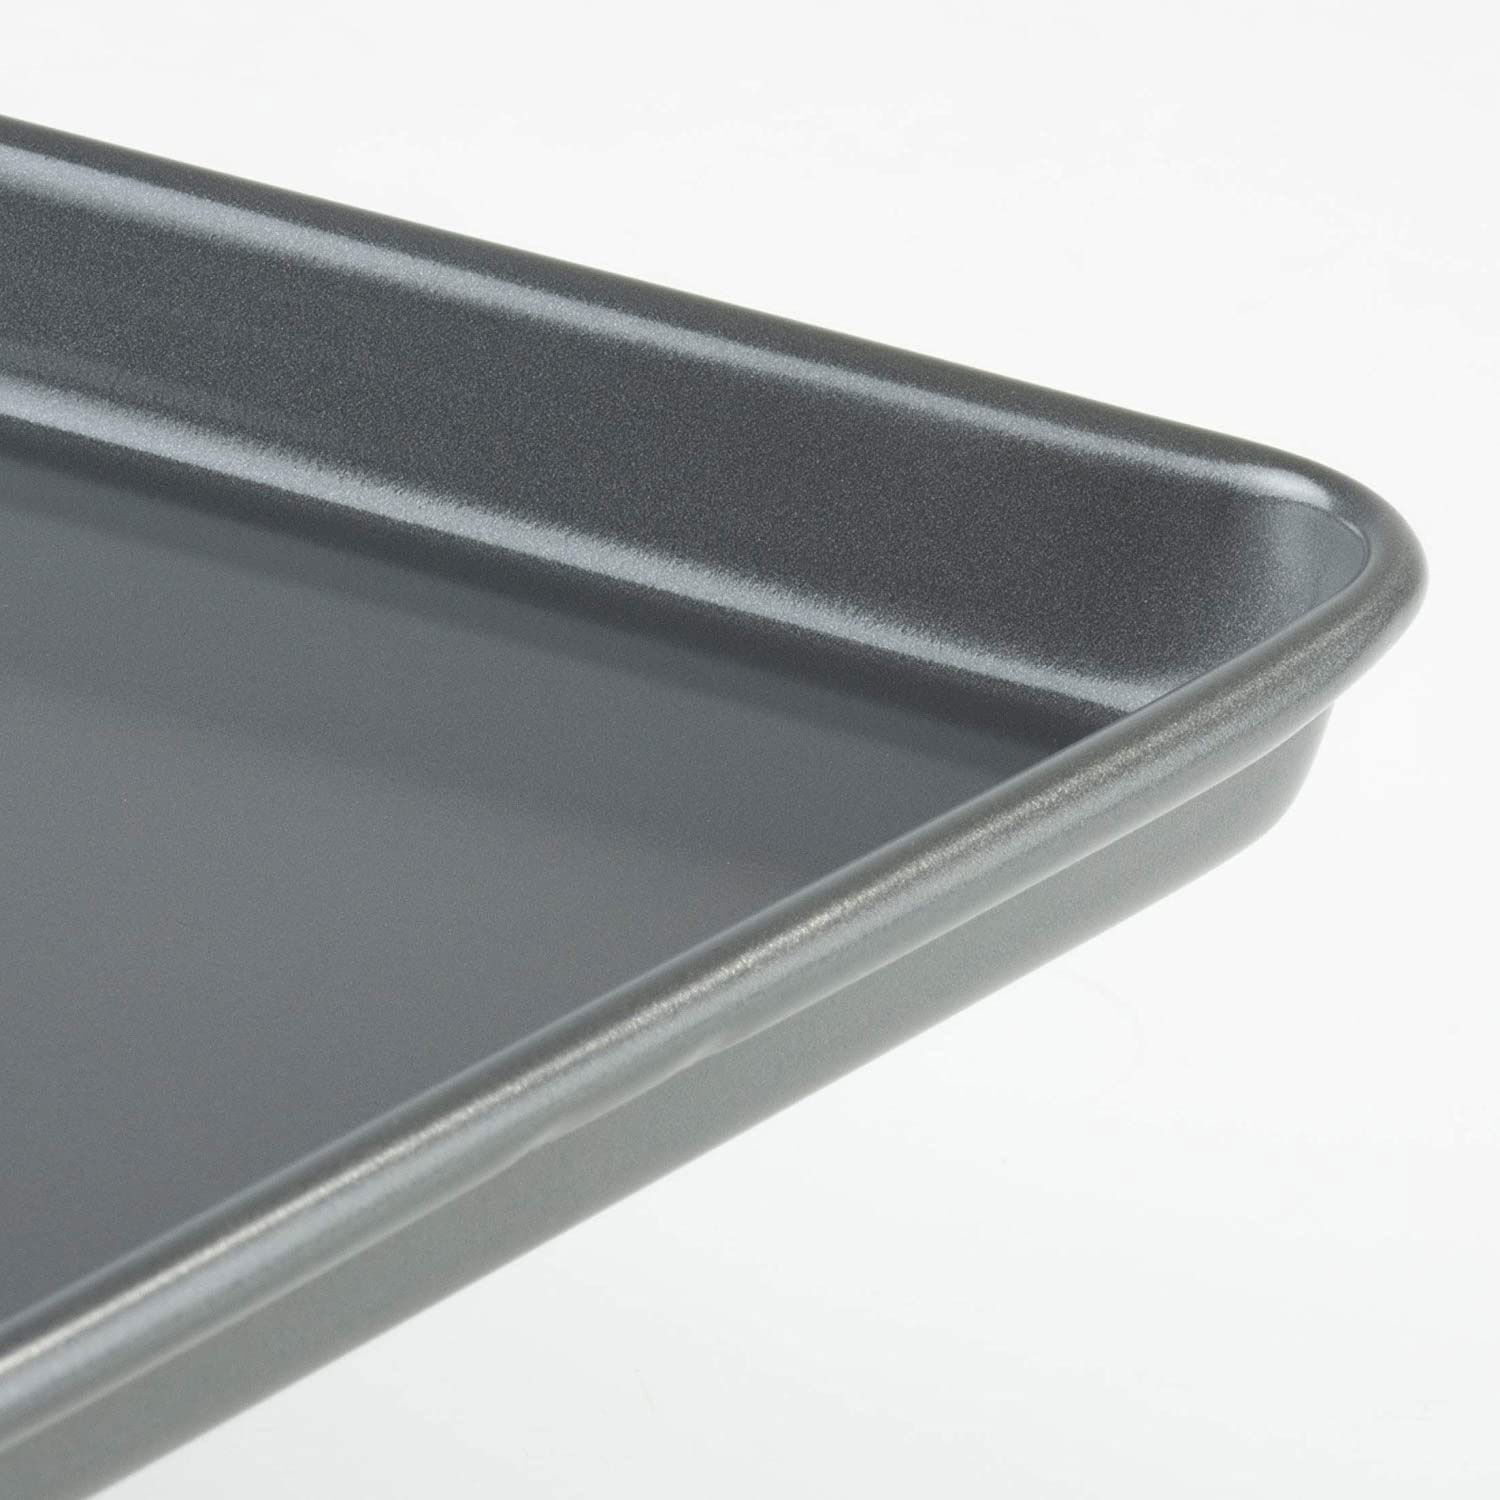 Pro Chef Large Oven Tray